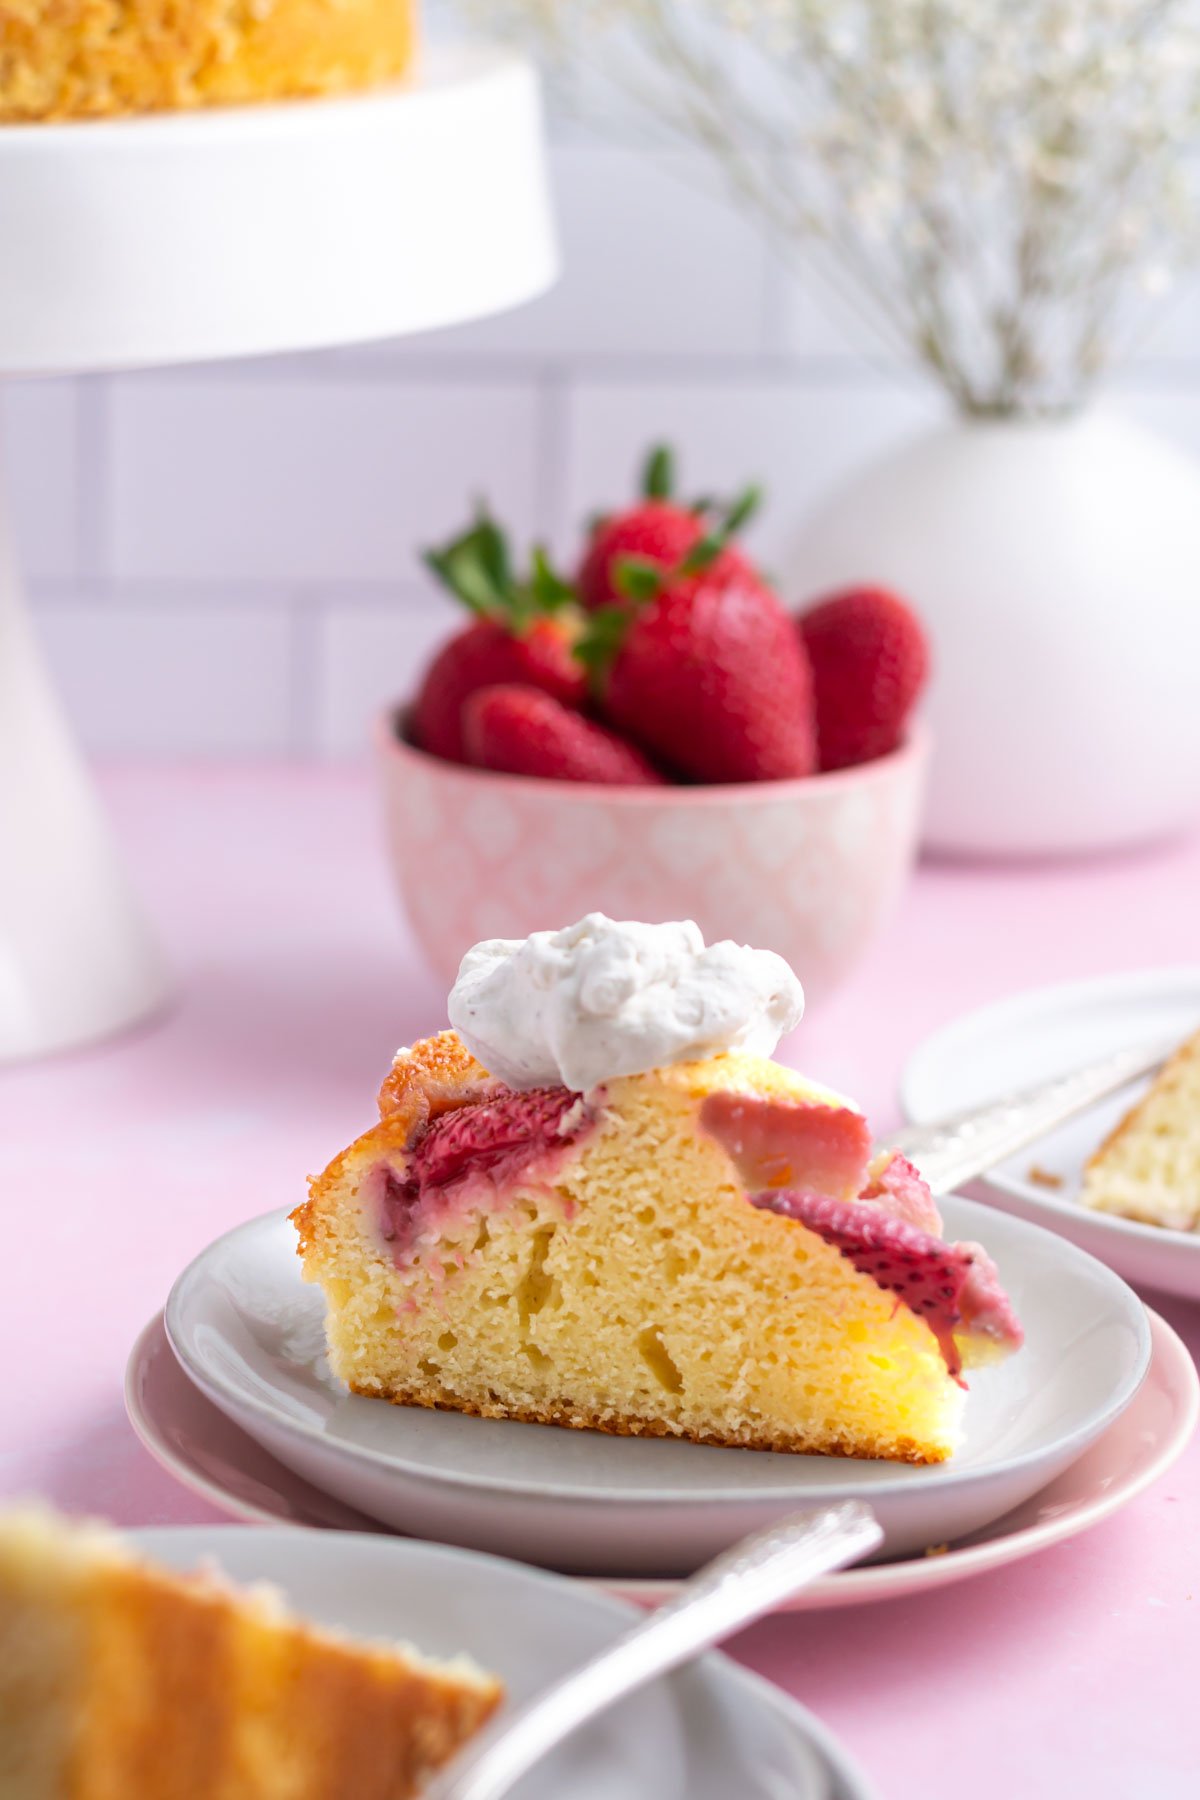 slice of strawberry vanilla cake with whipped cream on a plate with bowl of strawberries in the background